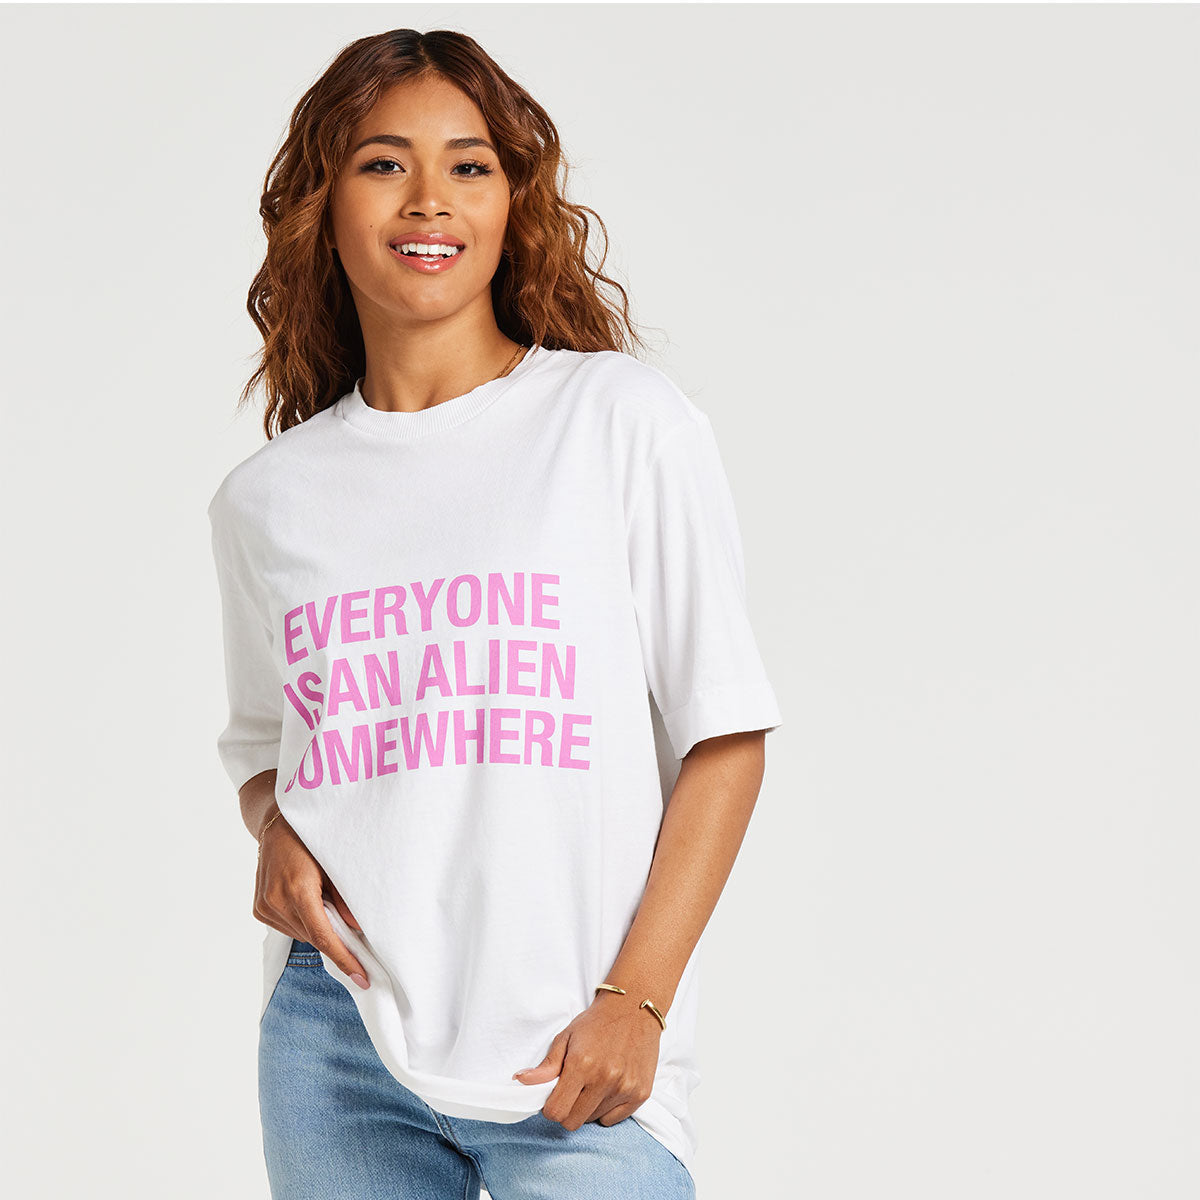 Everyone Is An Alien Somewhere Tee - White